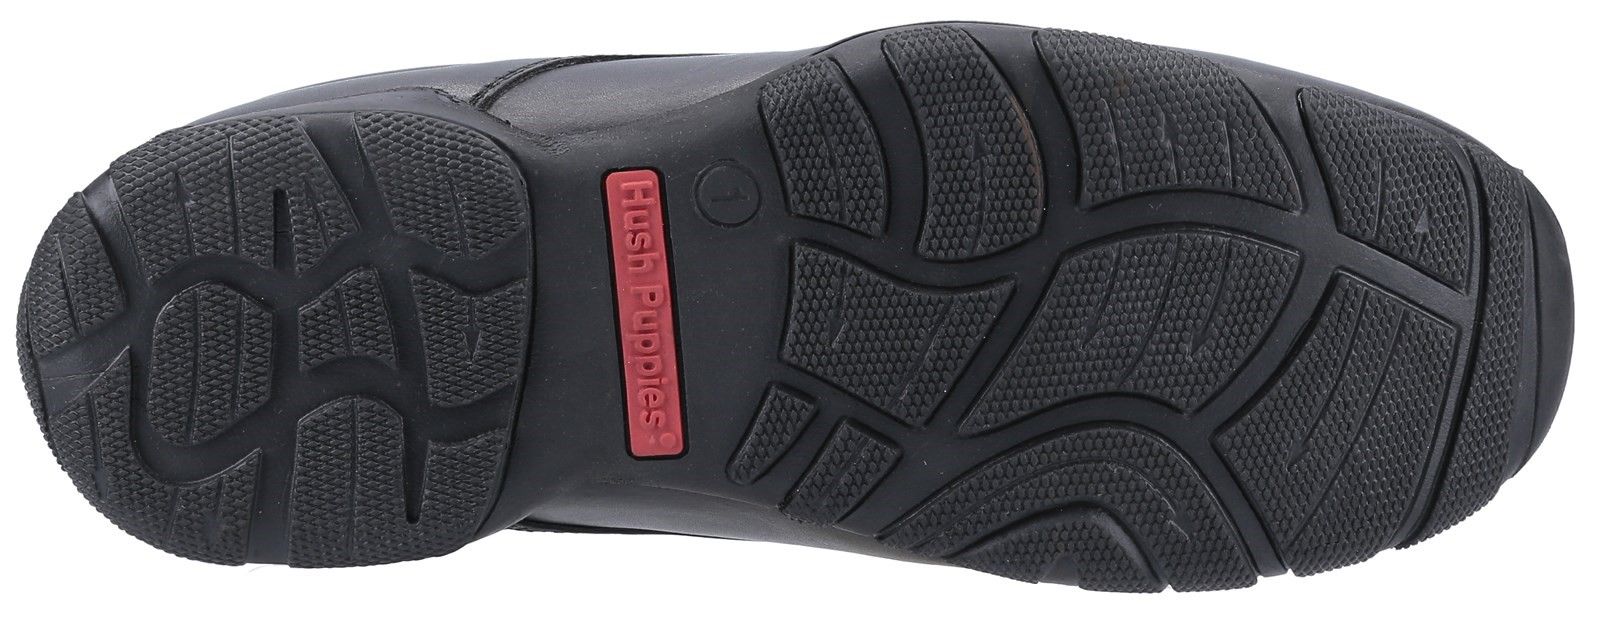 Elijah is a single fit smooth leather slip on boys school shoe, with stitching details and elastic gusset for an improved fit.  Lightweight midsole with a memory foam footbed providing all day comfort.Leather Upper. 
Memory Foam Insole. 
Micro-Fresh Lining.